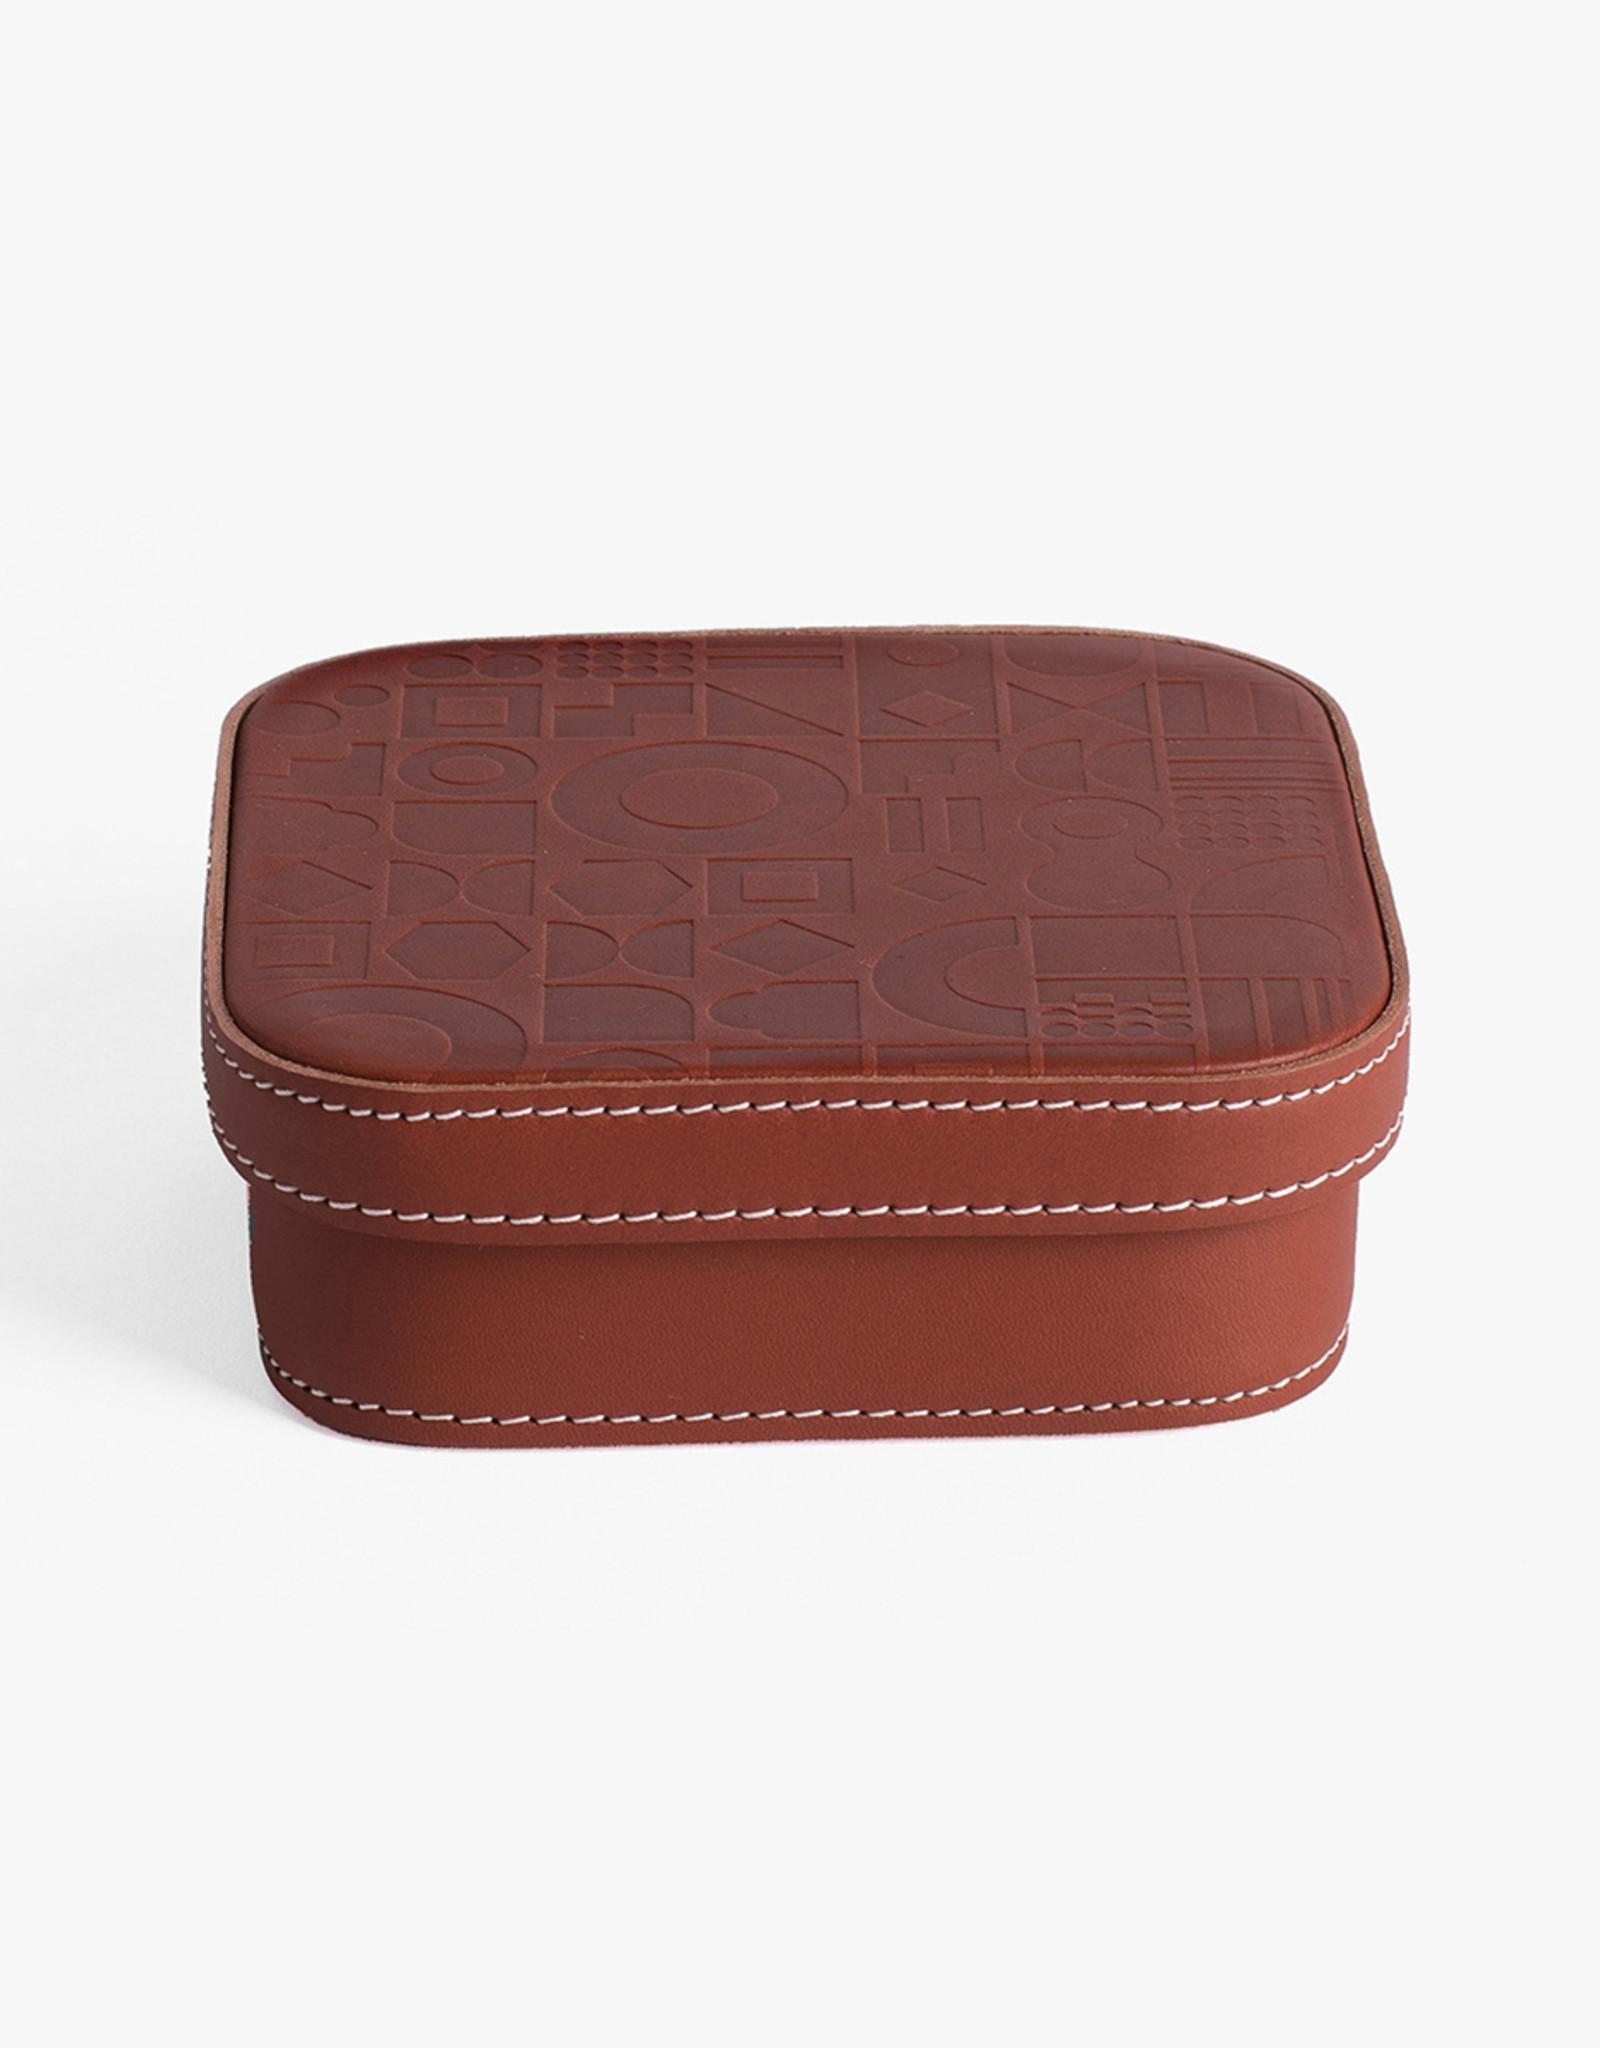 Small Leather Embossed Box by Carl Cavallius for Palmgrens | Cognac leather